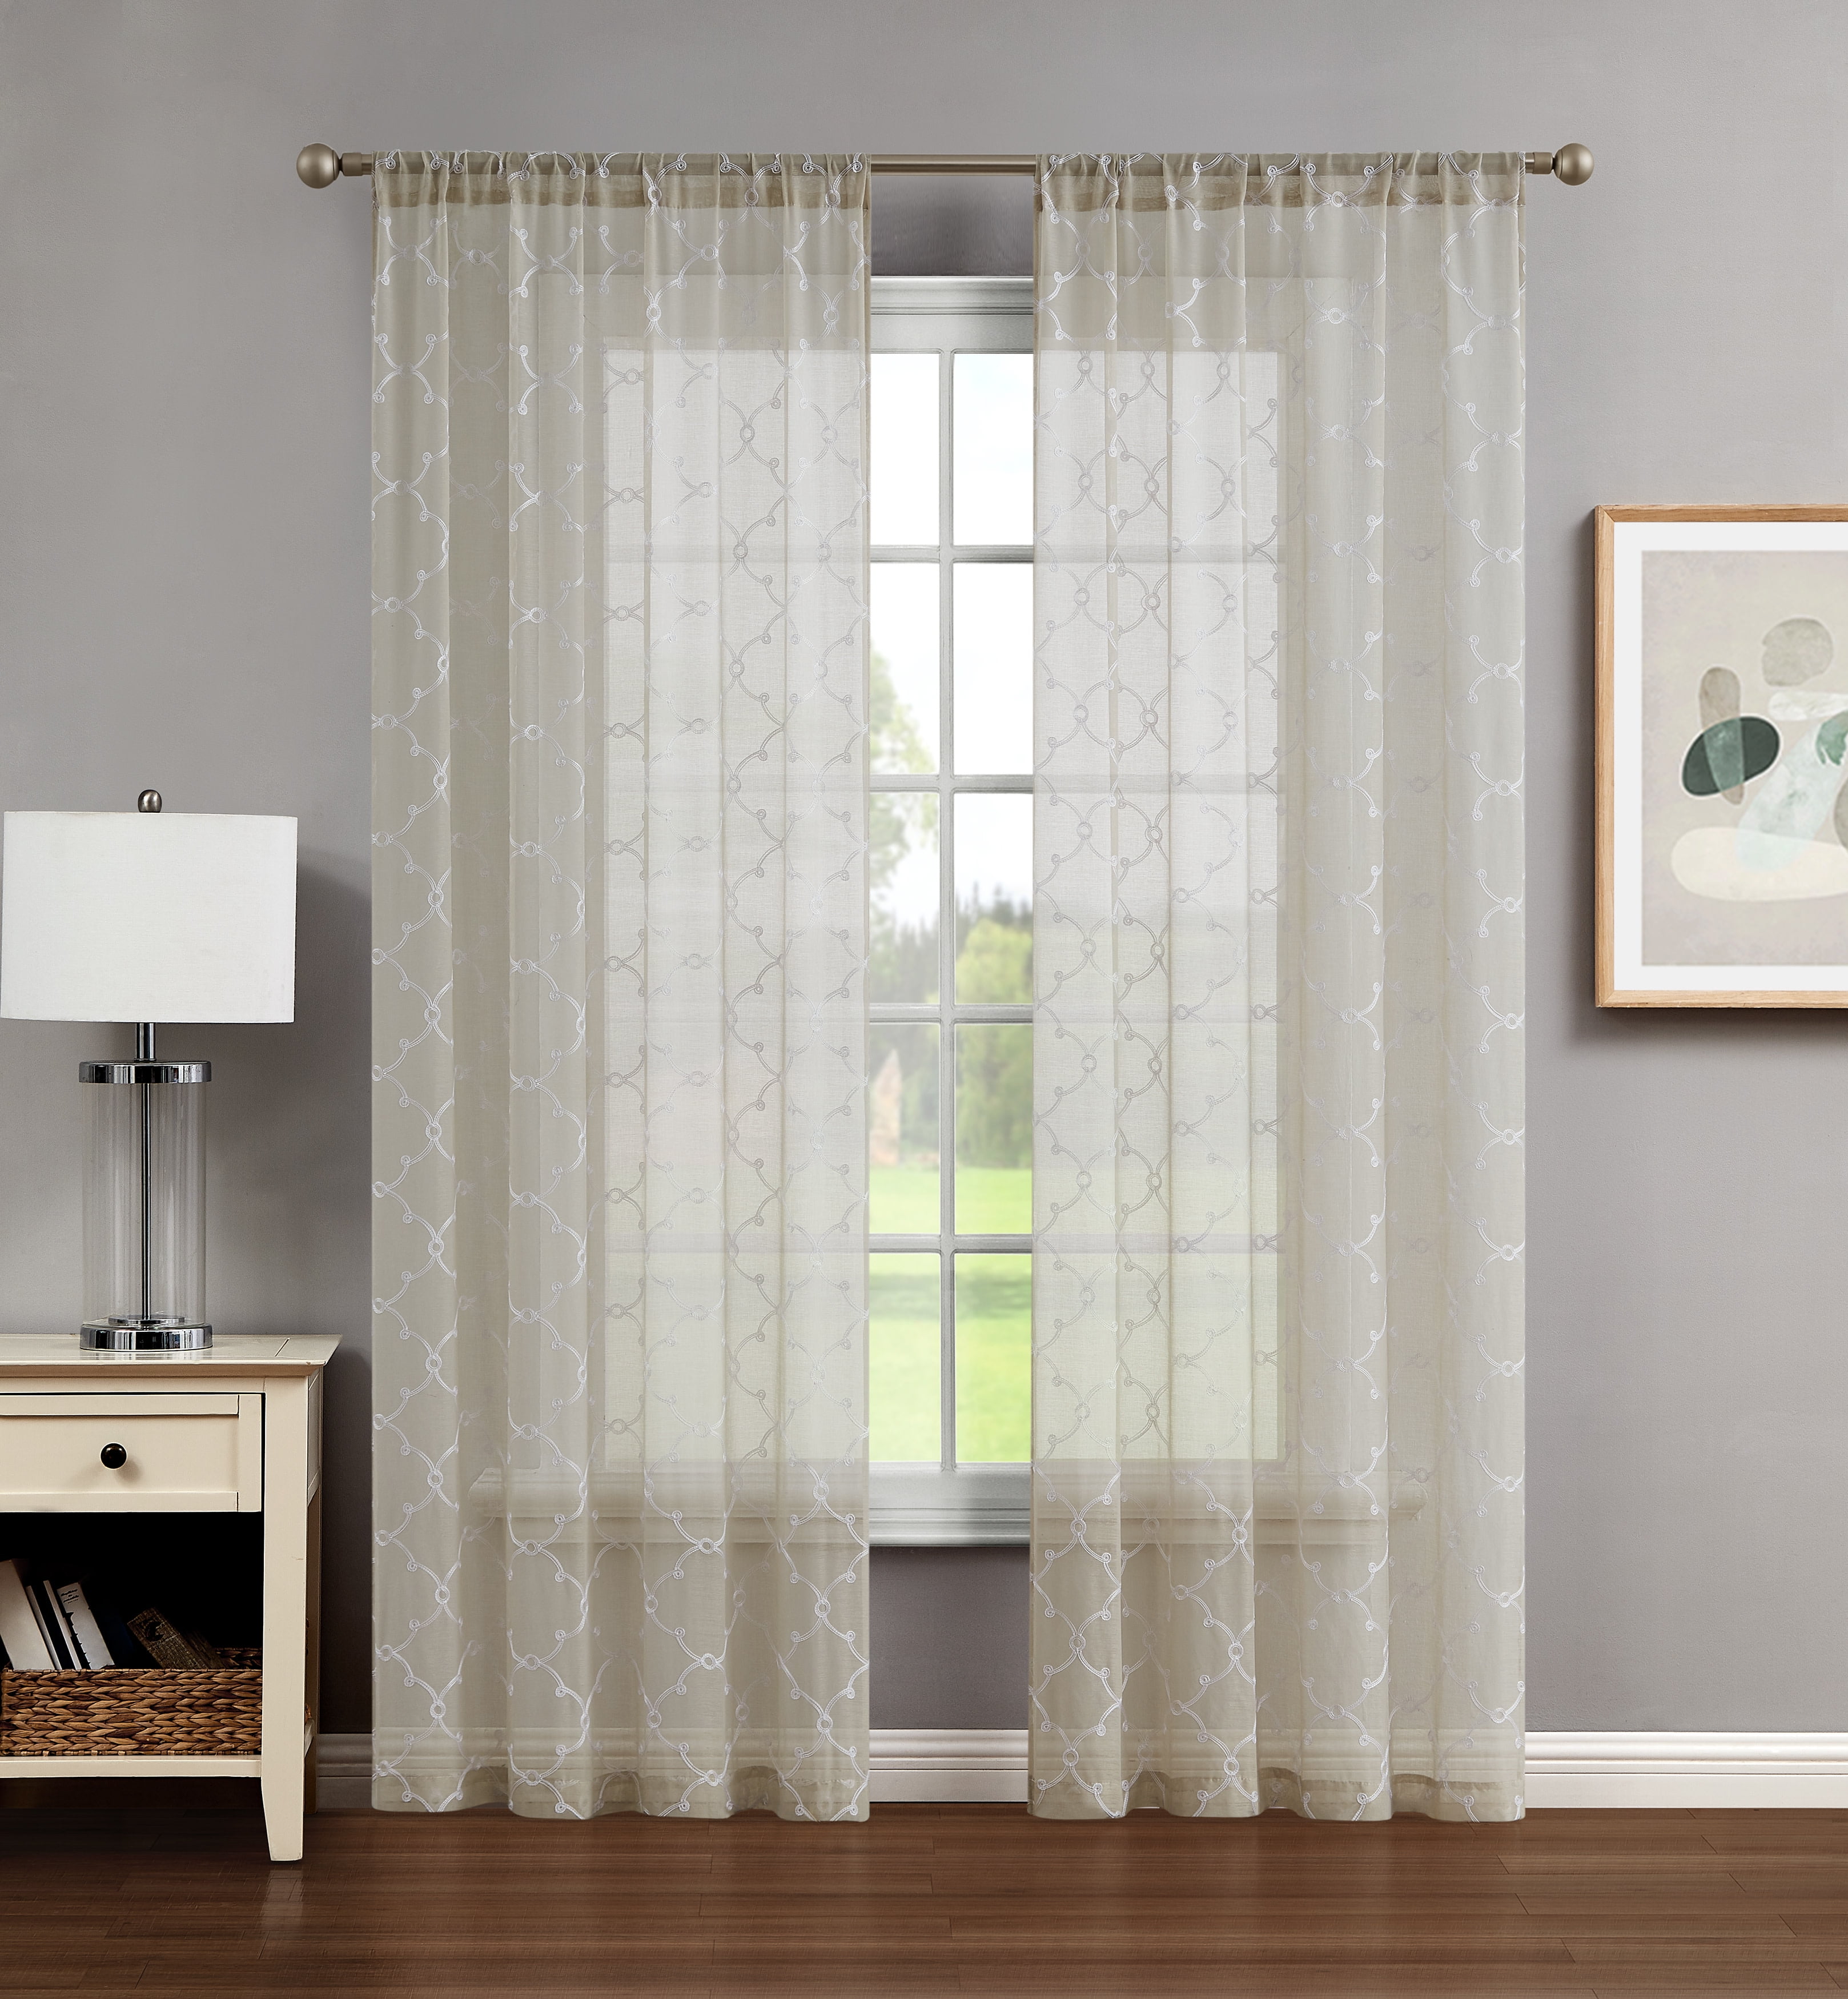 21 Unique Curtain Ideas to be Applied in Certain Home Styles - Talkdecor